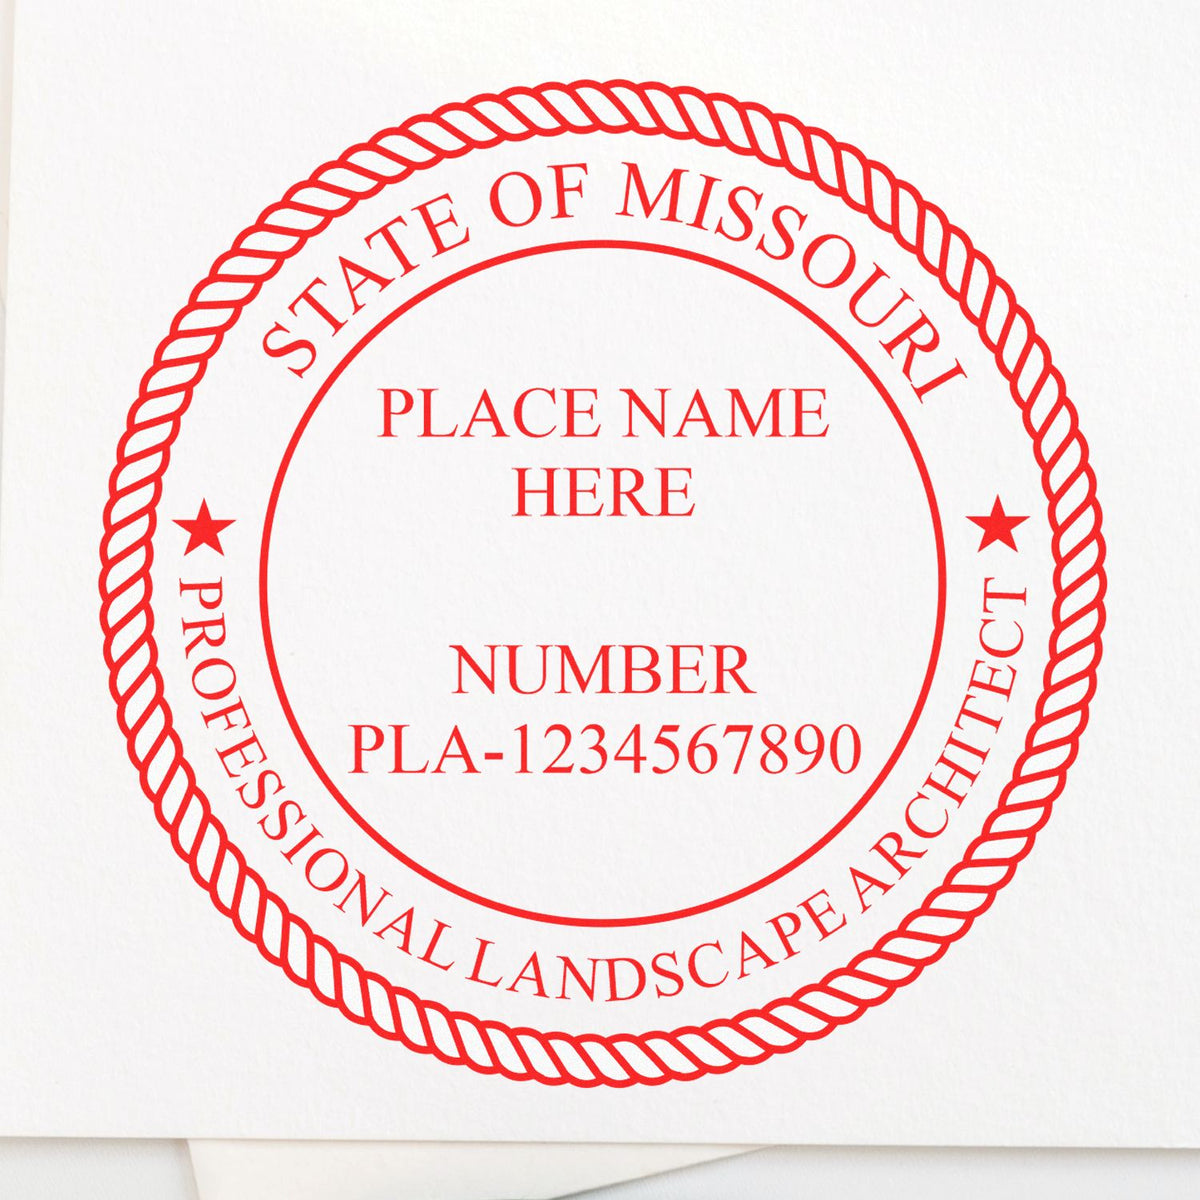 The Slim Pre-Inked Missouri Landscape Architect Seal Stamp stamp impression comes to life with a crisp, detailed photo on paper - showcasing true professional quality.